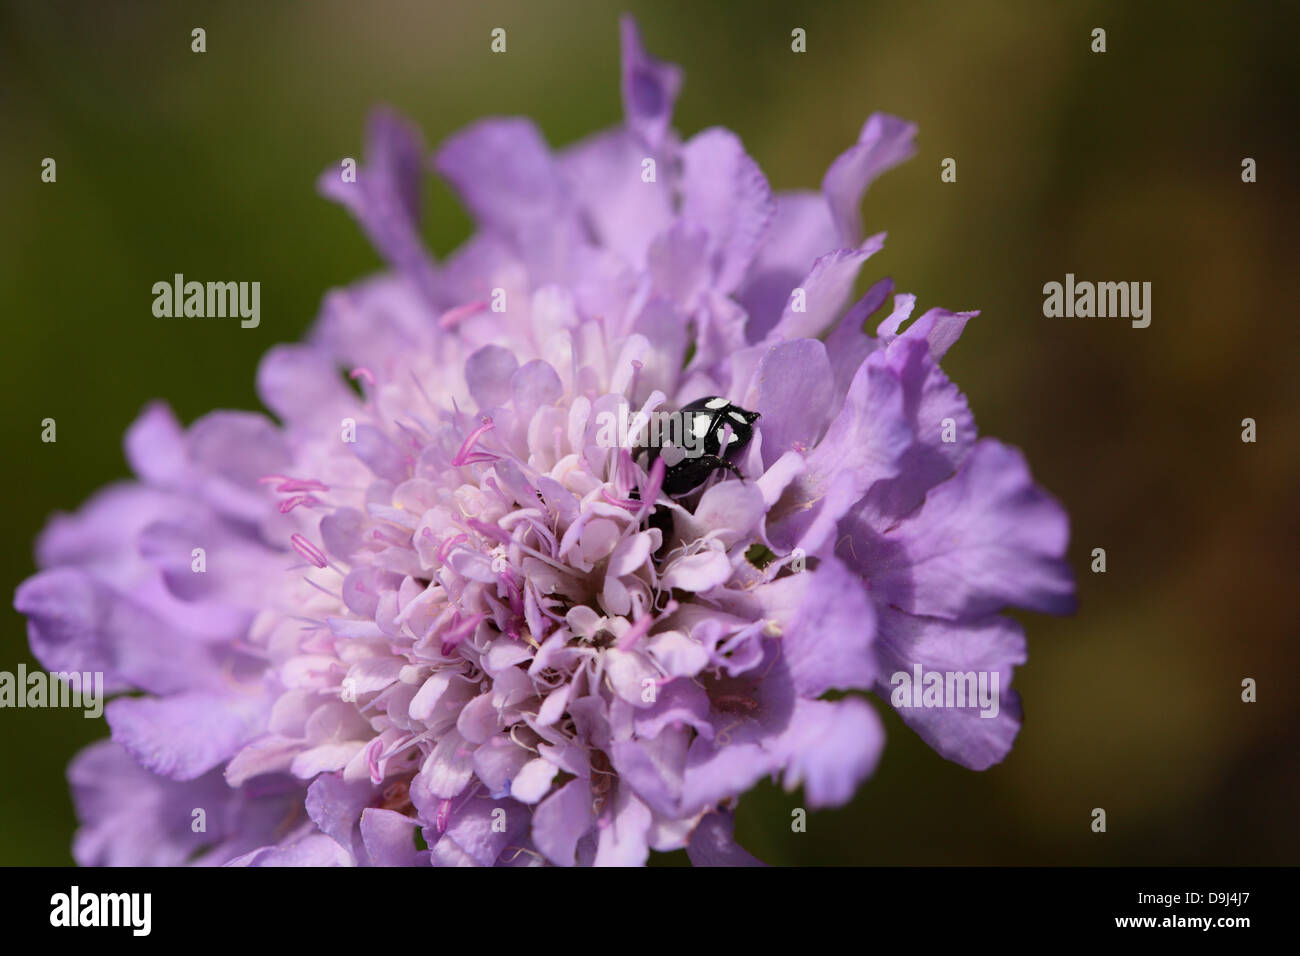 Black and white insect burrowing into a light purple flower Stock Photo